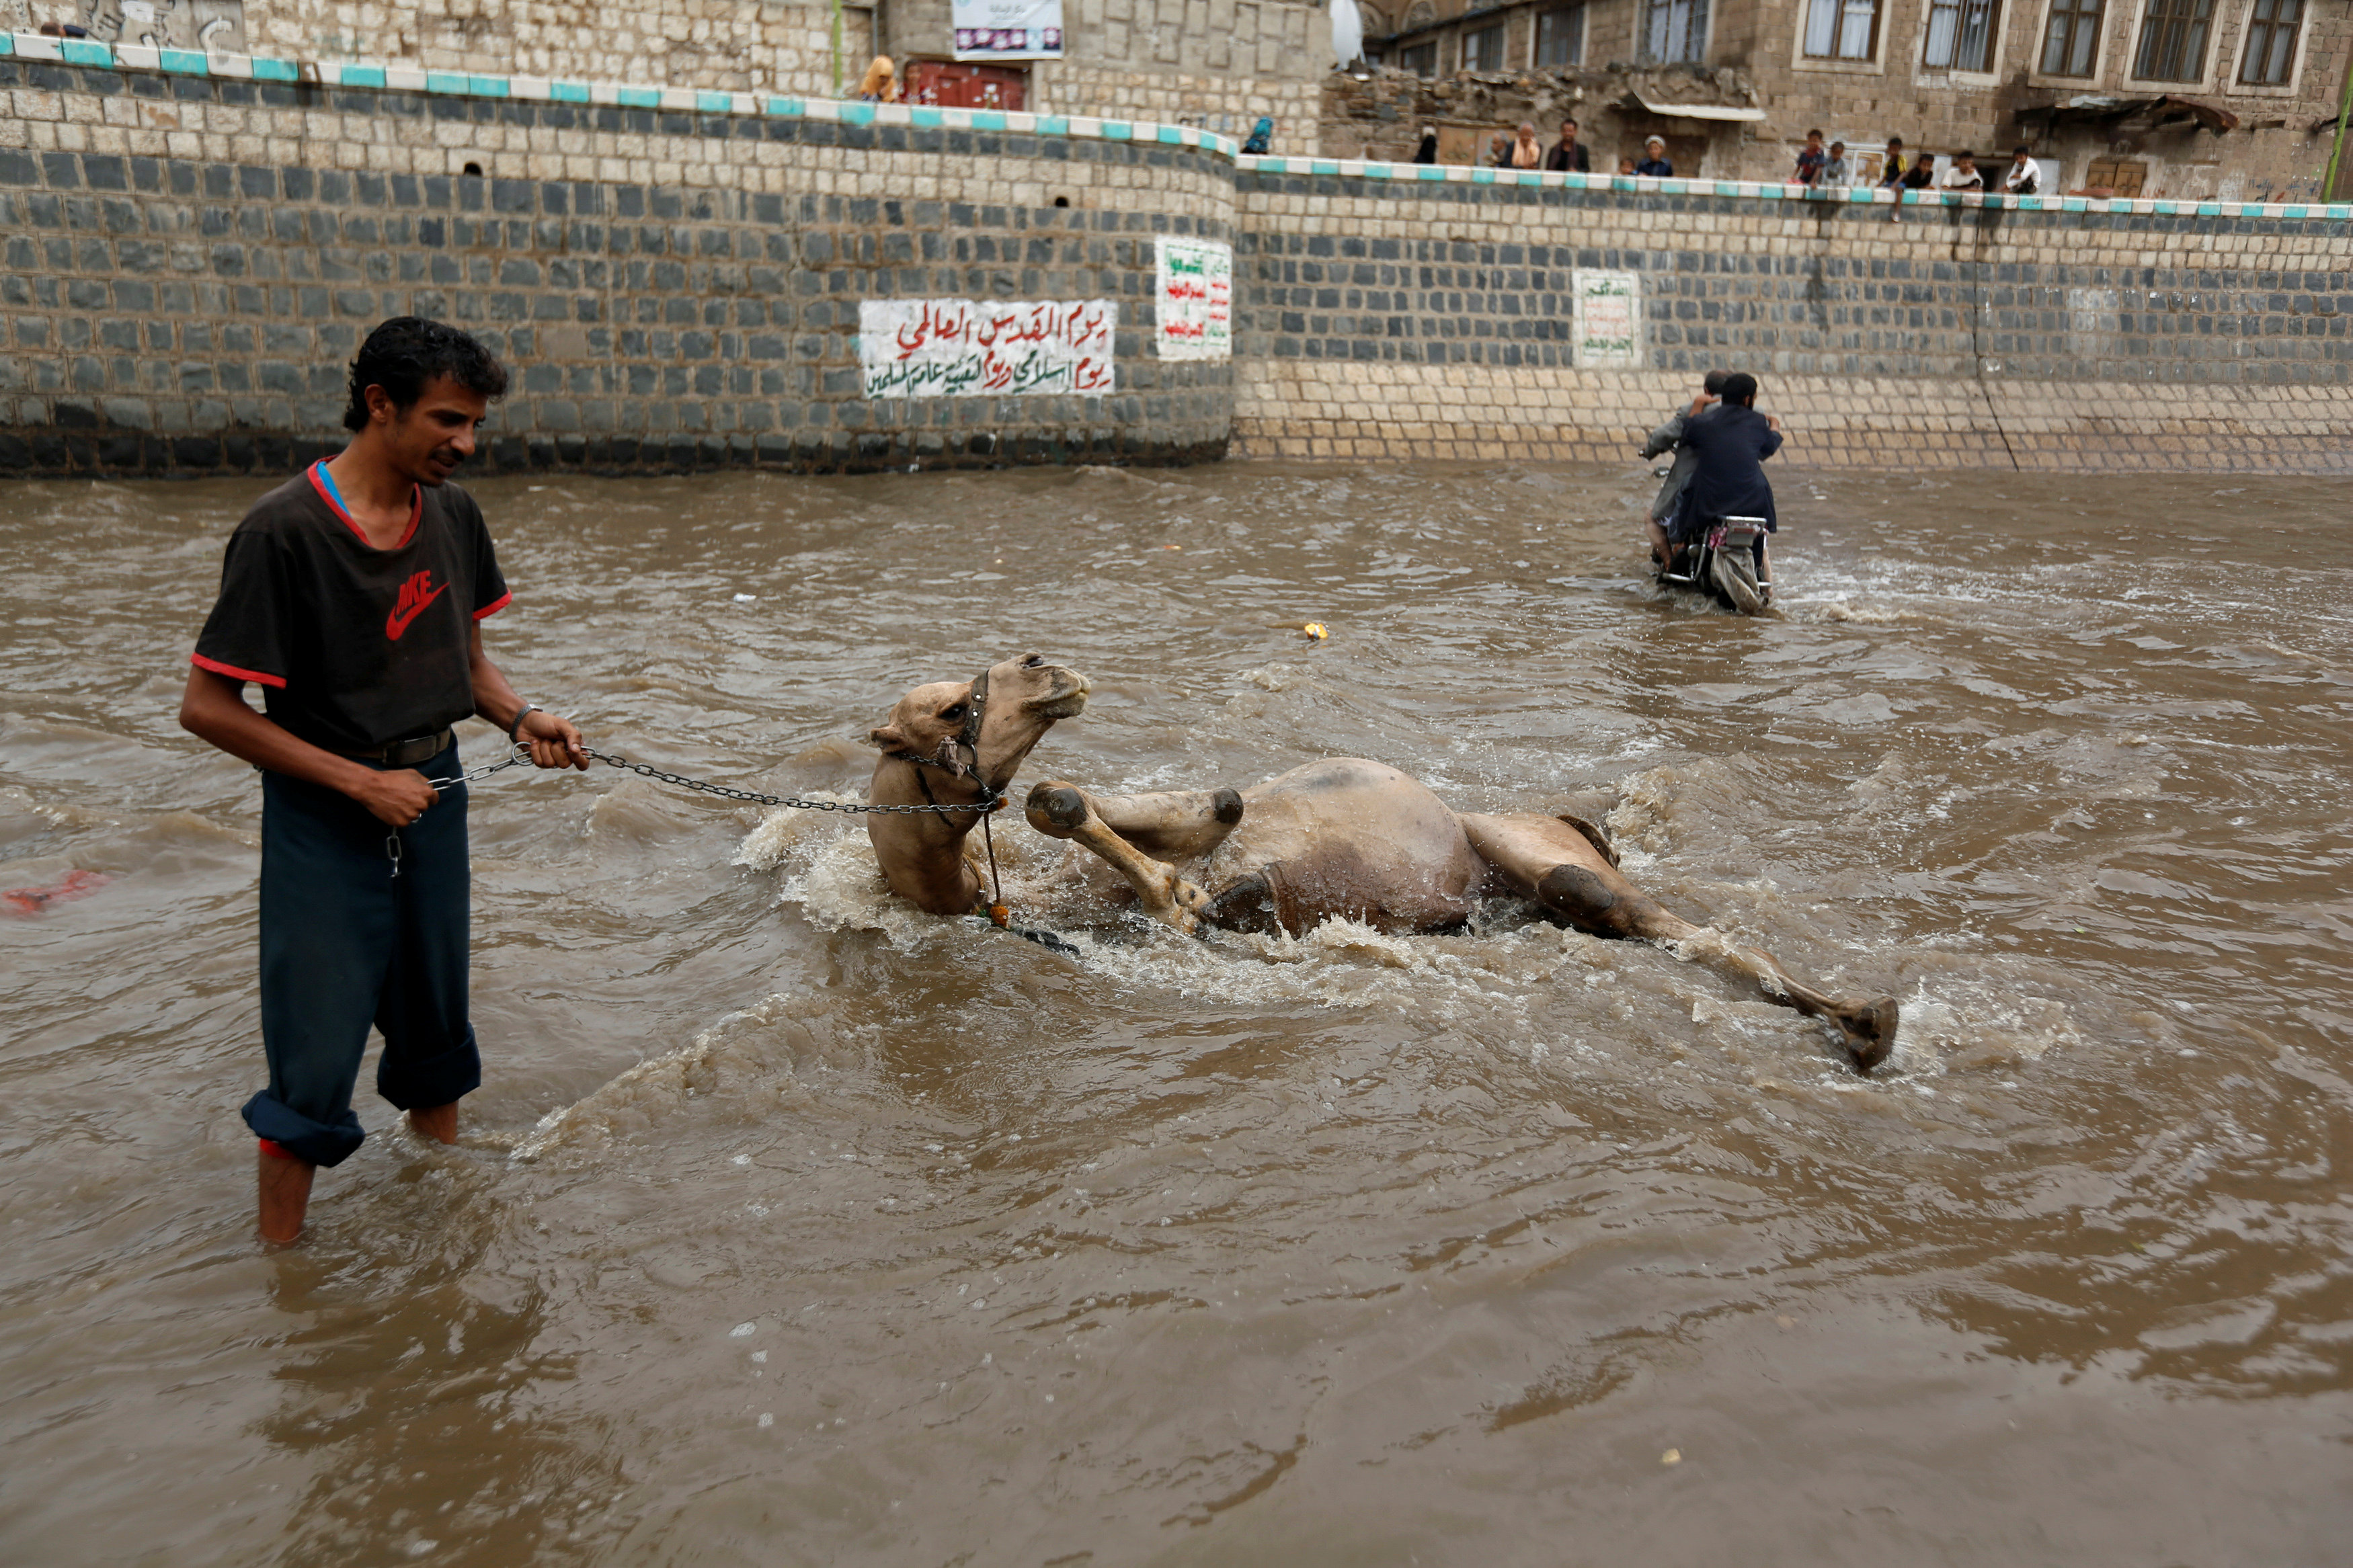 Man washes his camel in floodwater in the old quarter of Sanaa